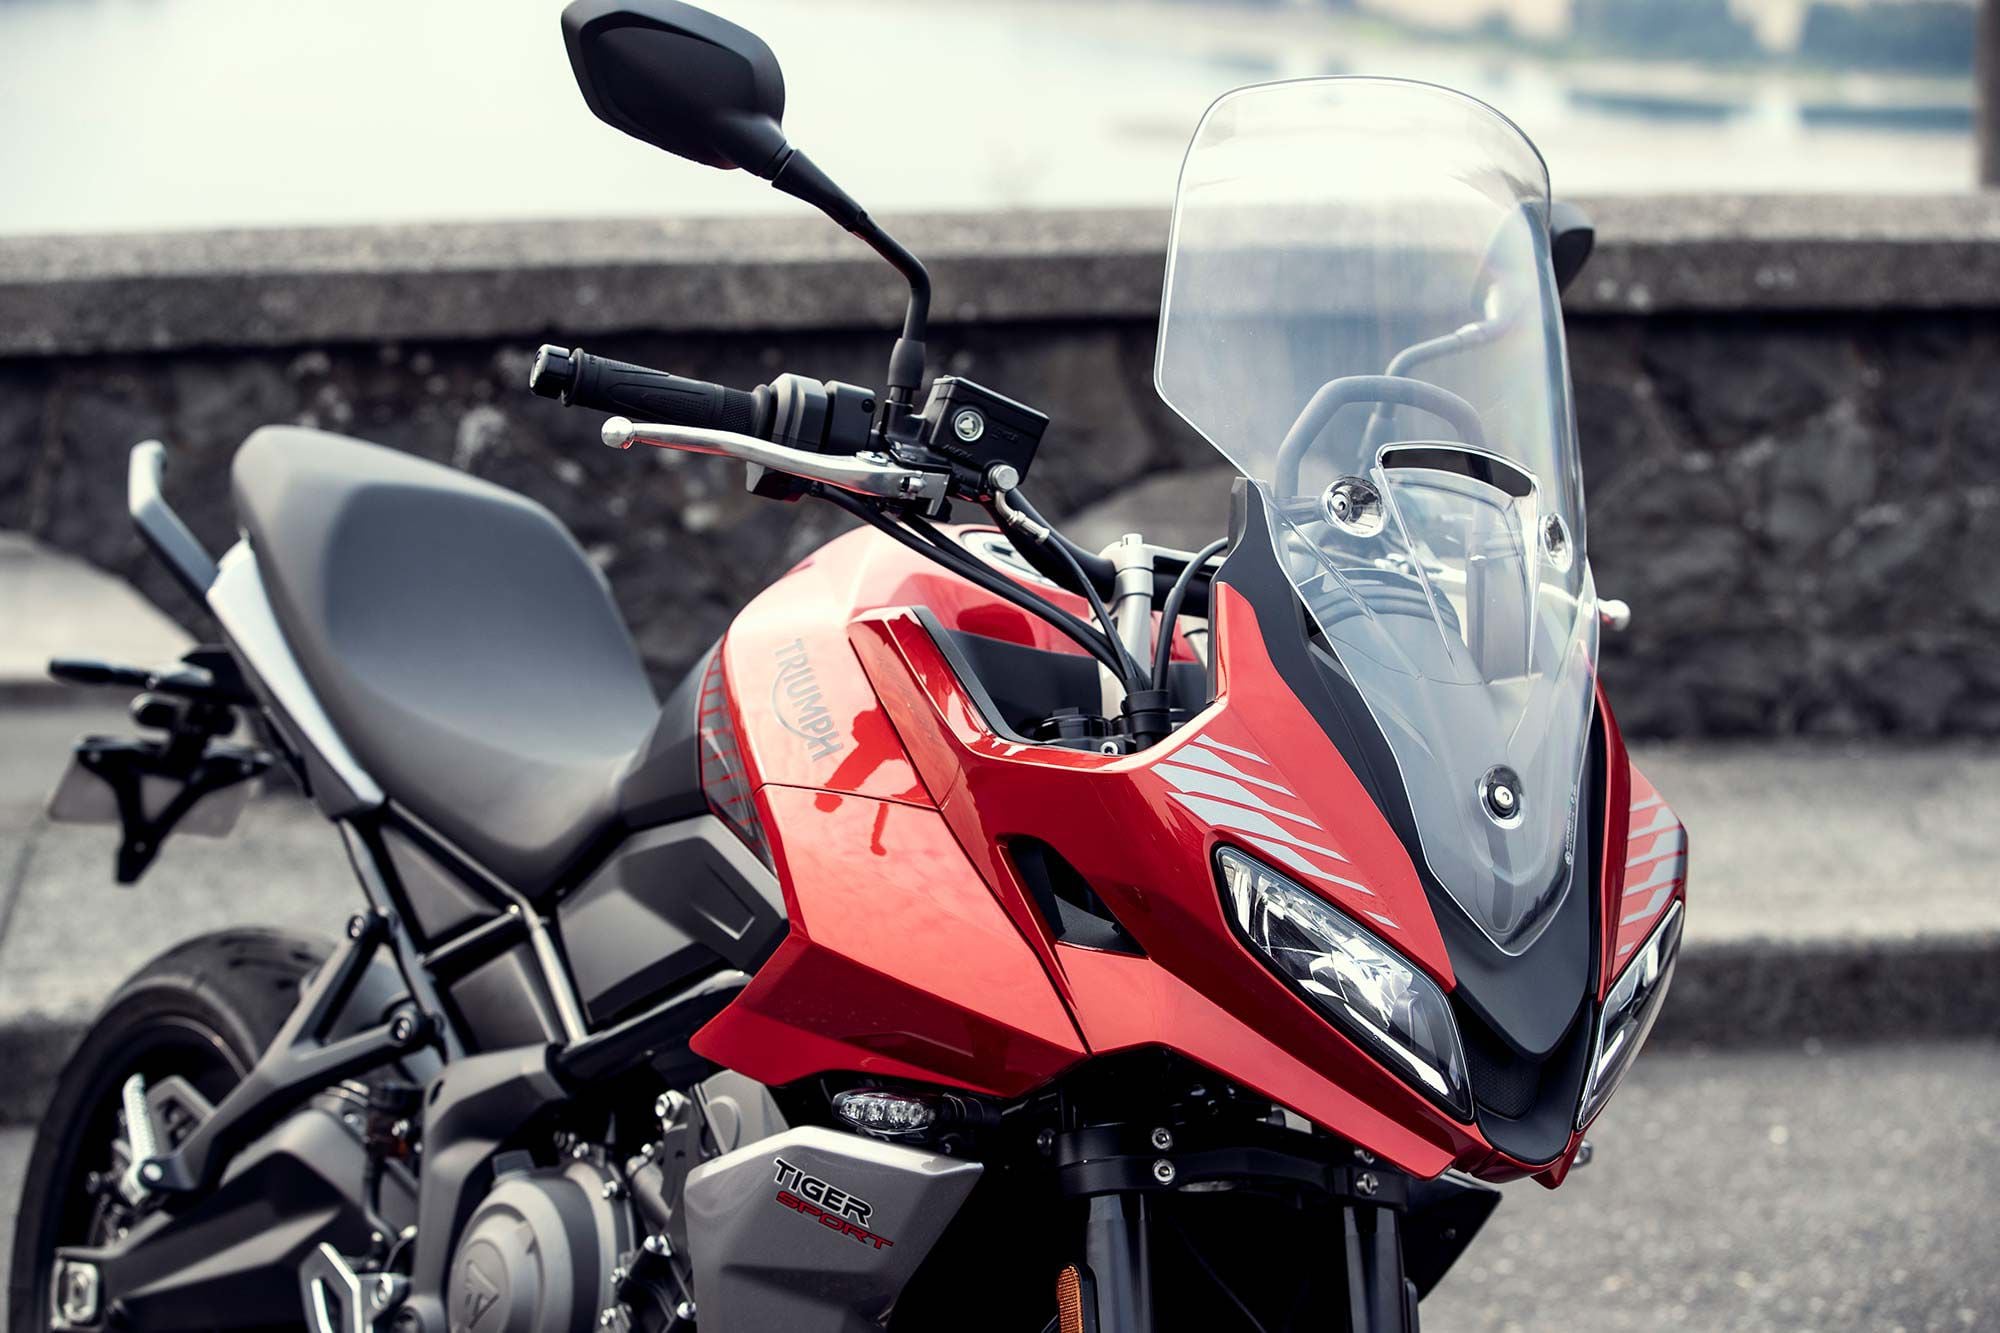 The Tiger Sport 660 gets aggressive and distinct styling with full LED lighting throughout. In this Korosi Red and Graphite colorway (a $125 upcharge) it looks very similar to the BMW F 900 XR.